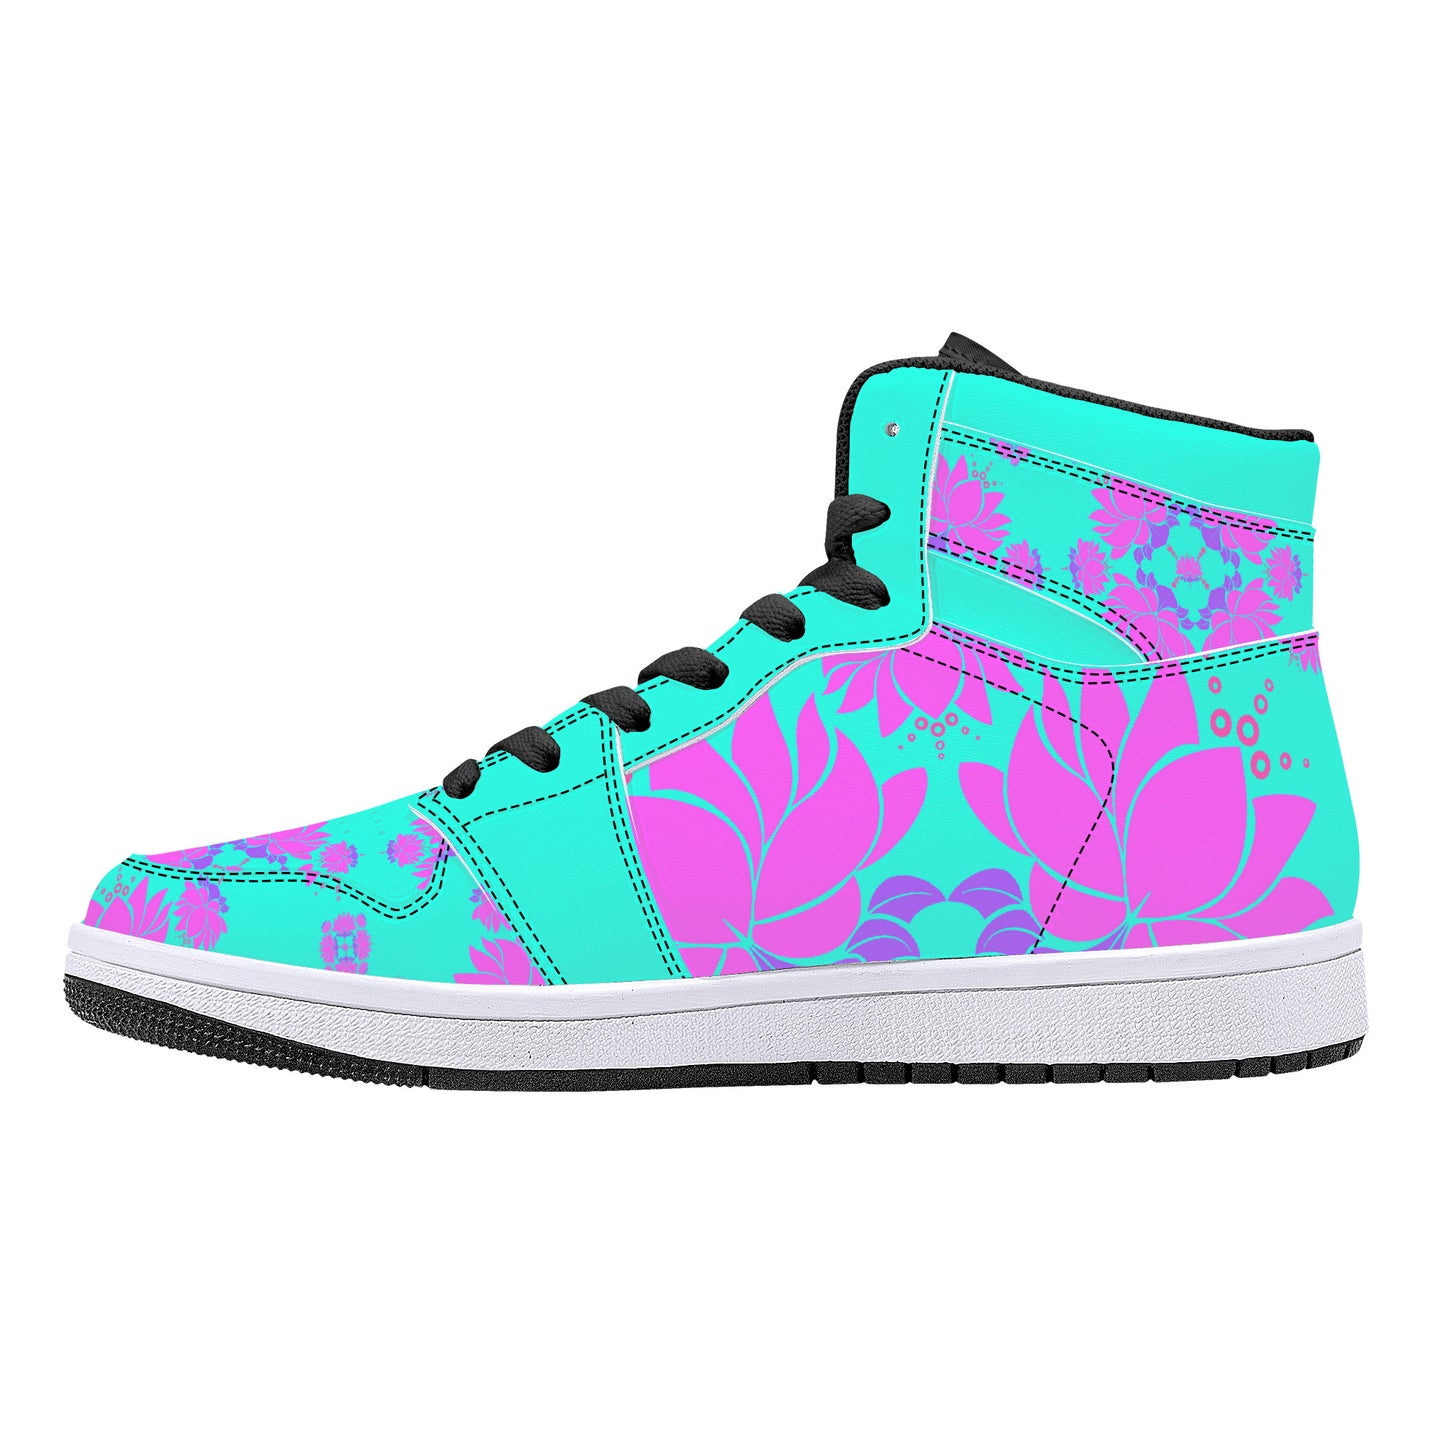 "Lotus" High-Top Synthetic Leather Sneakers